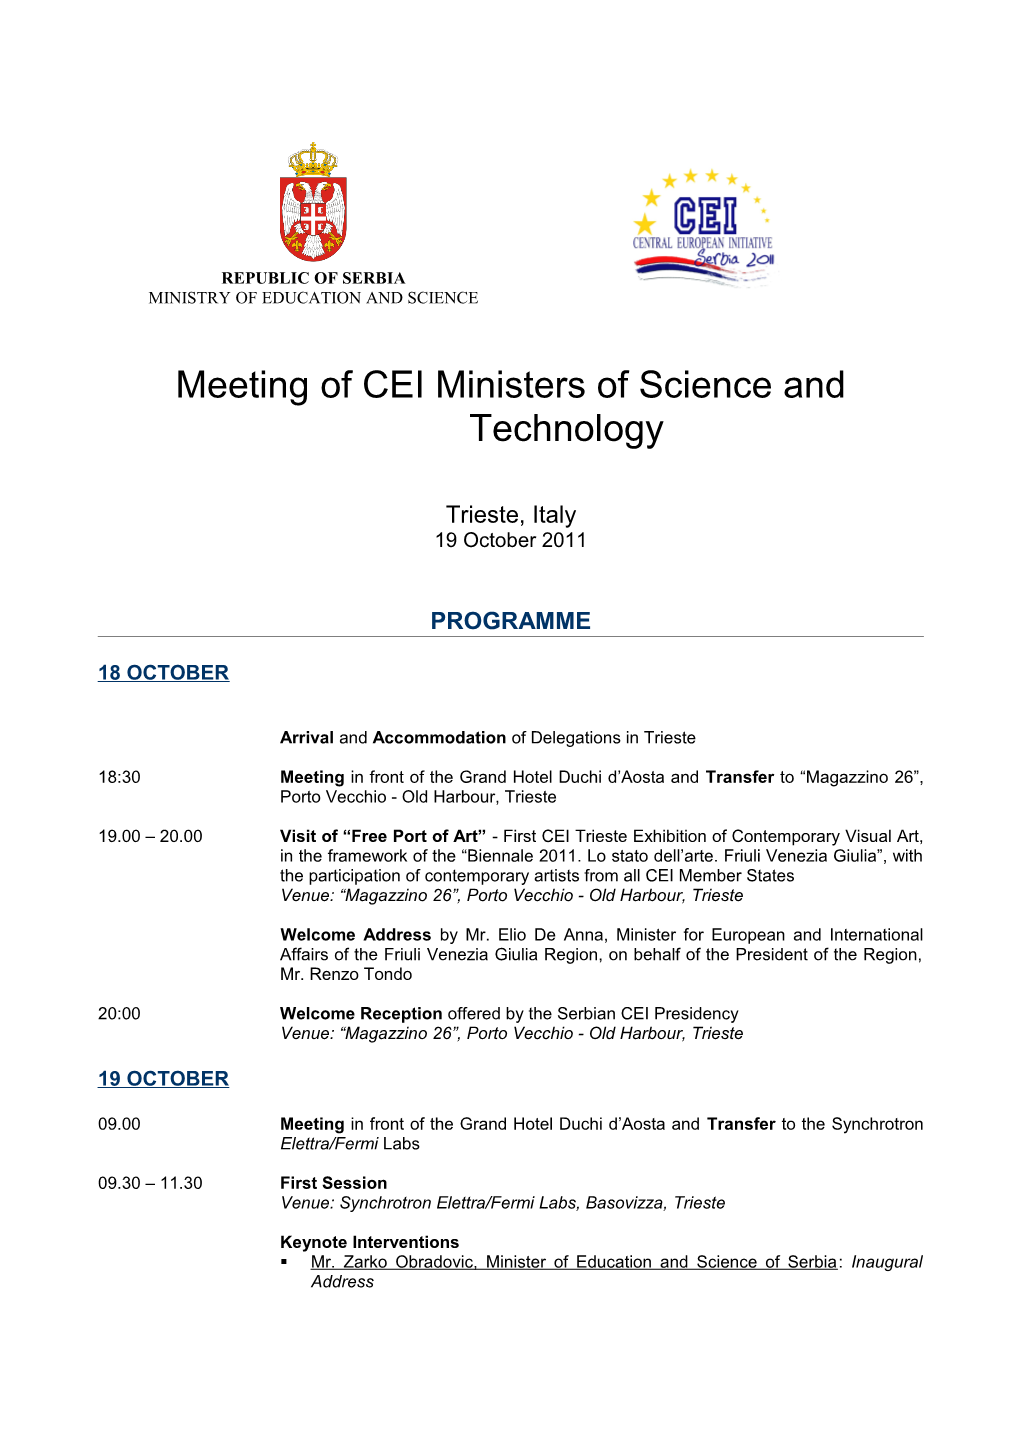 Meeting of CEI Ministers of Science and Technology